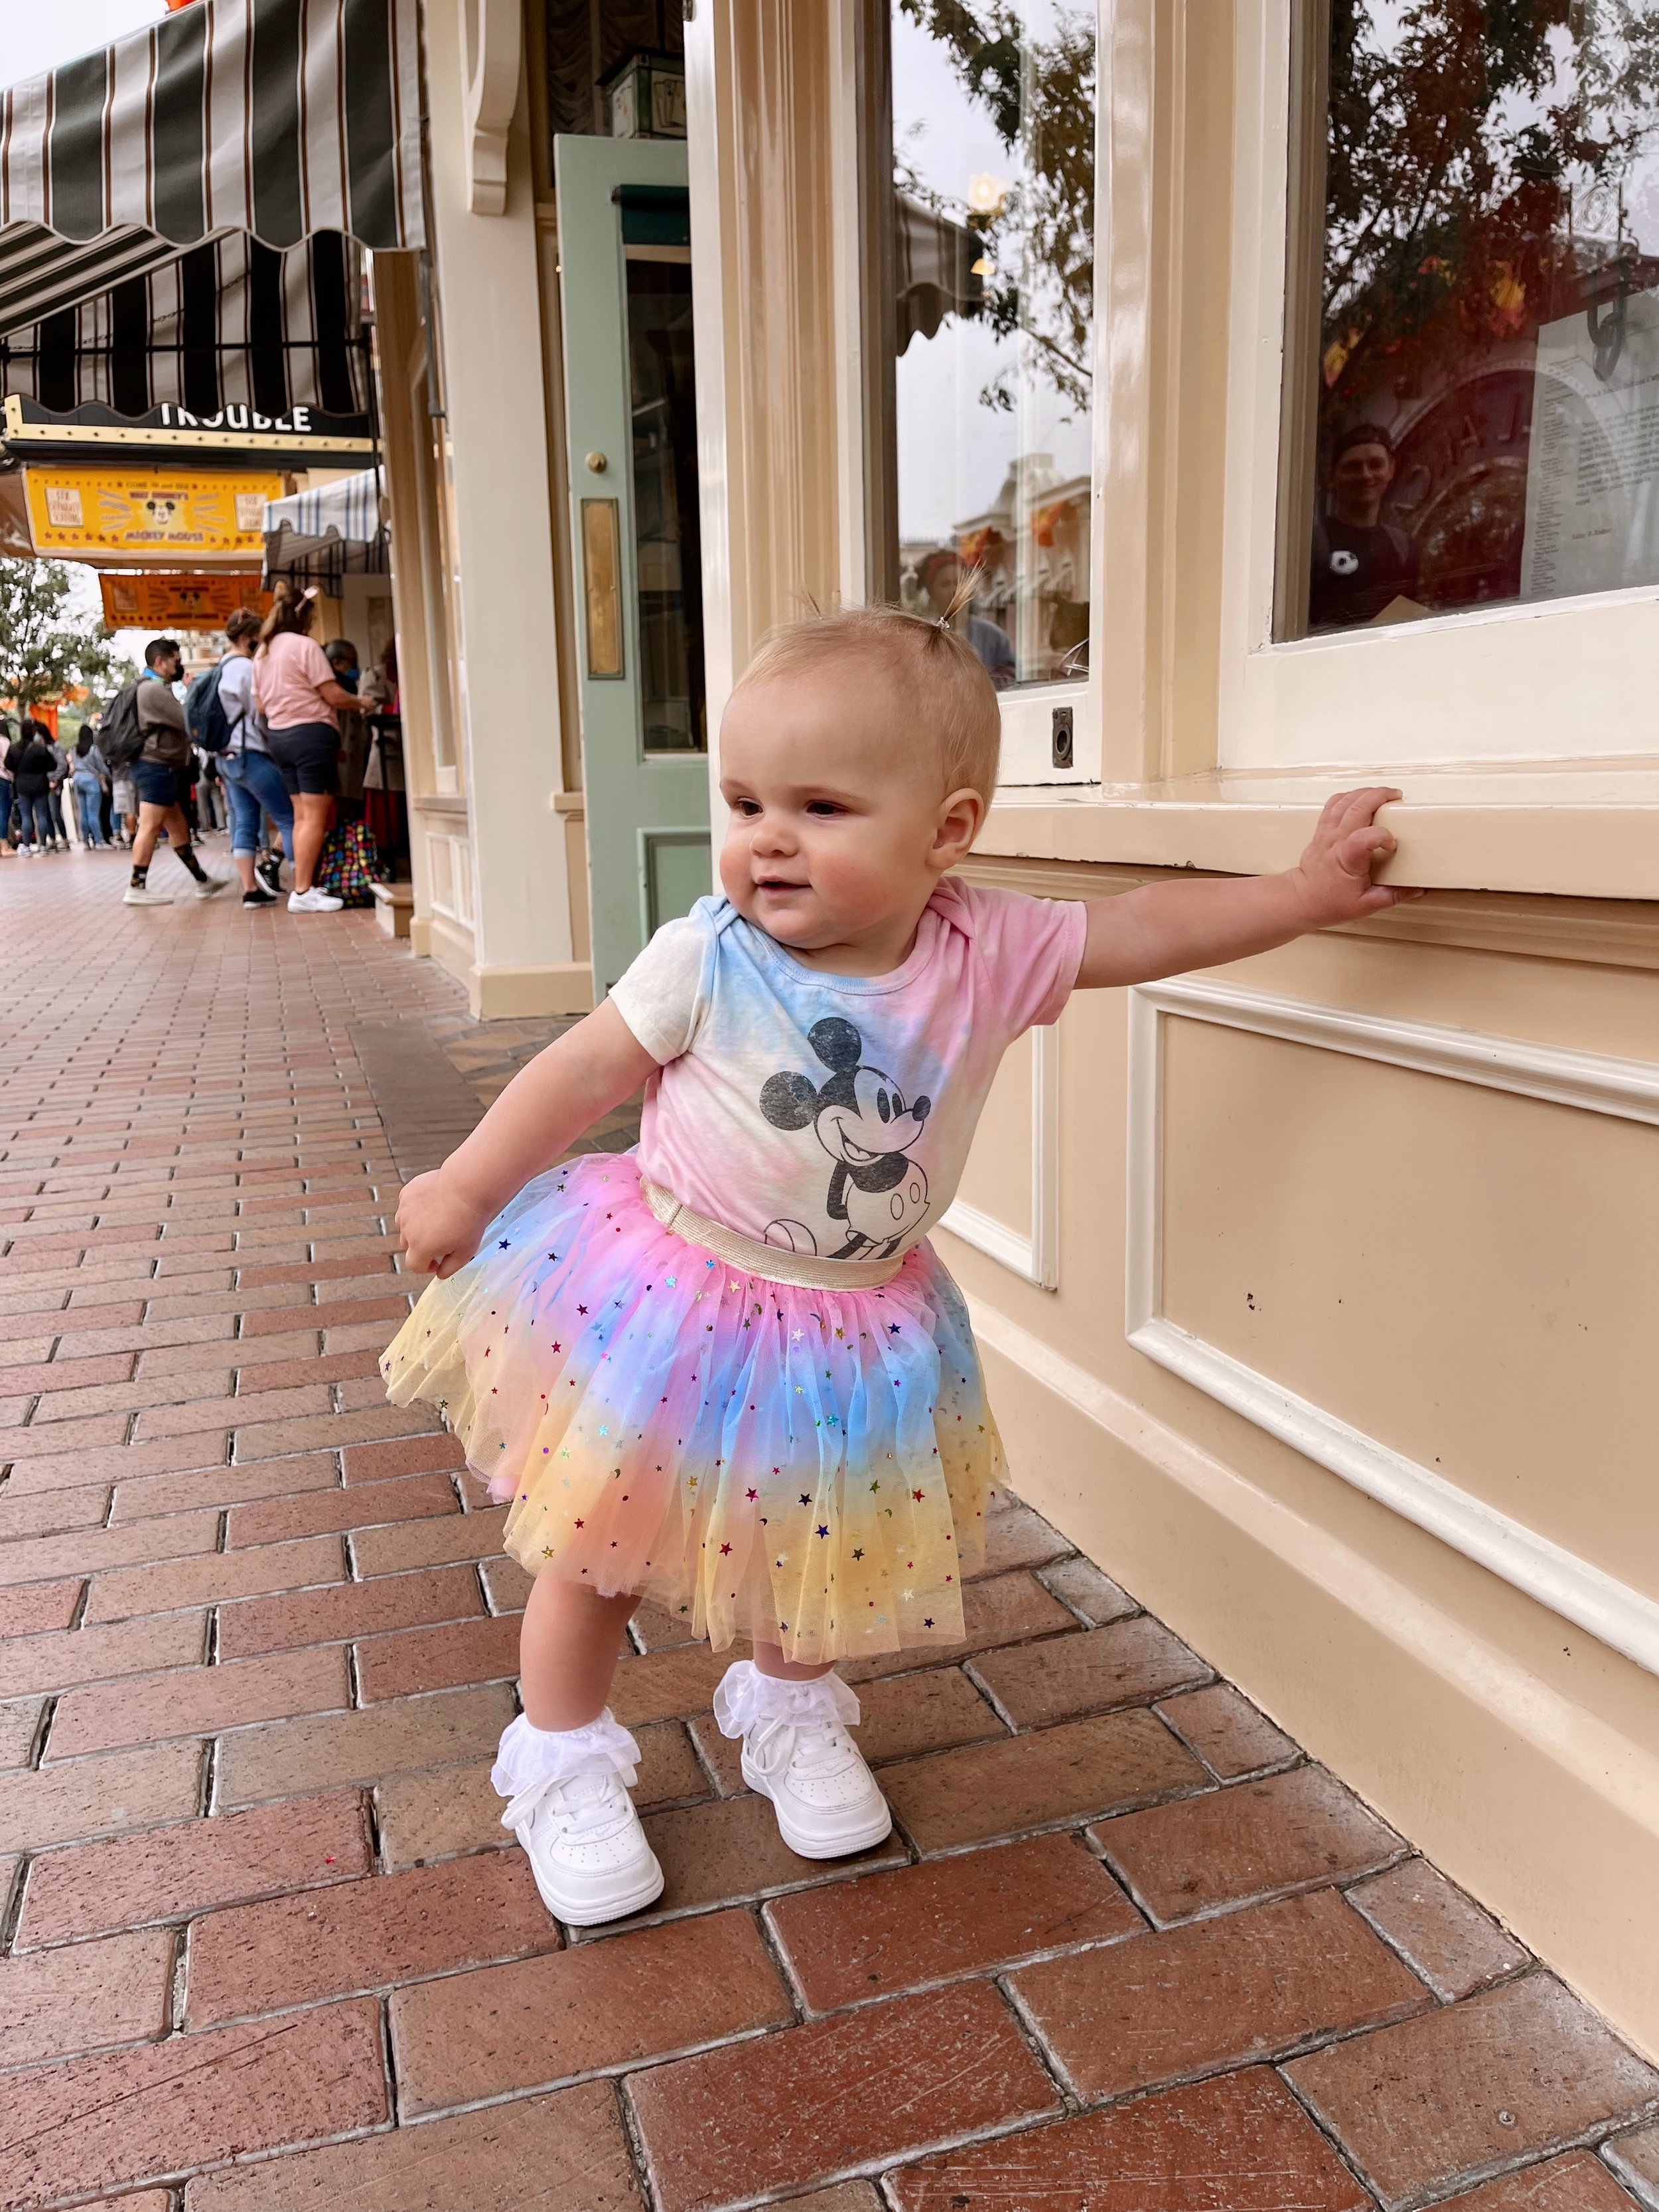 Disneyland With A Baby - What You Need To Know - bresheppard.com.JPG